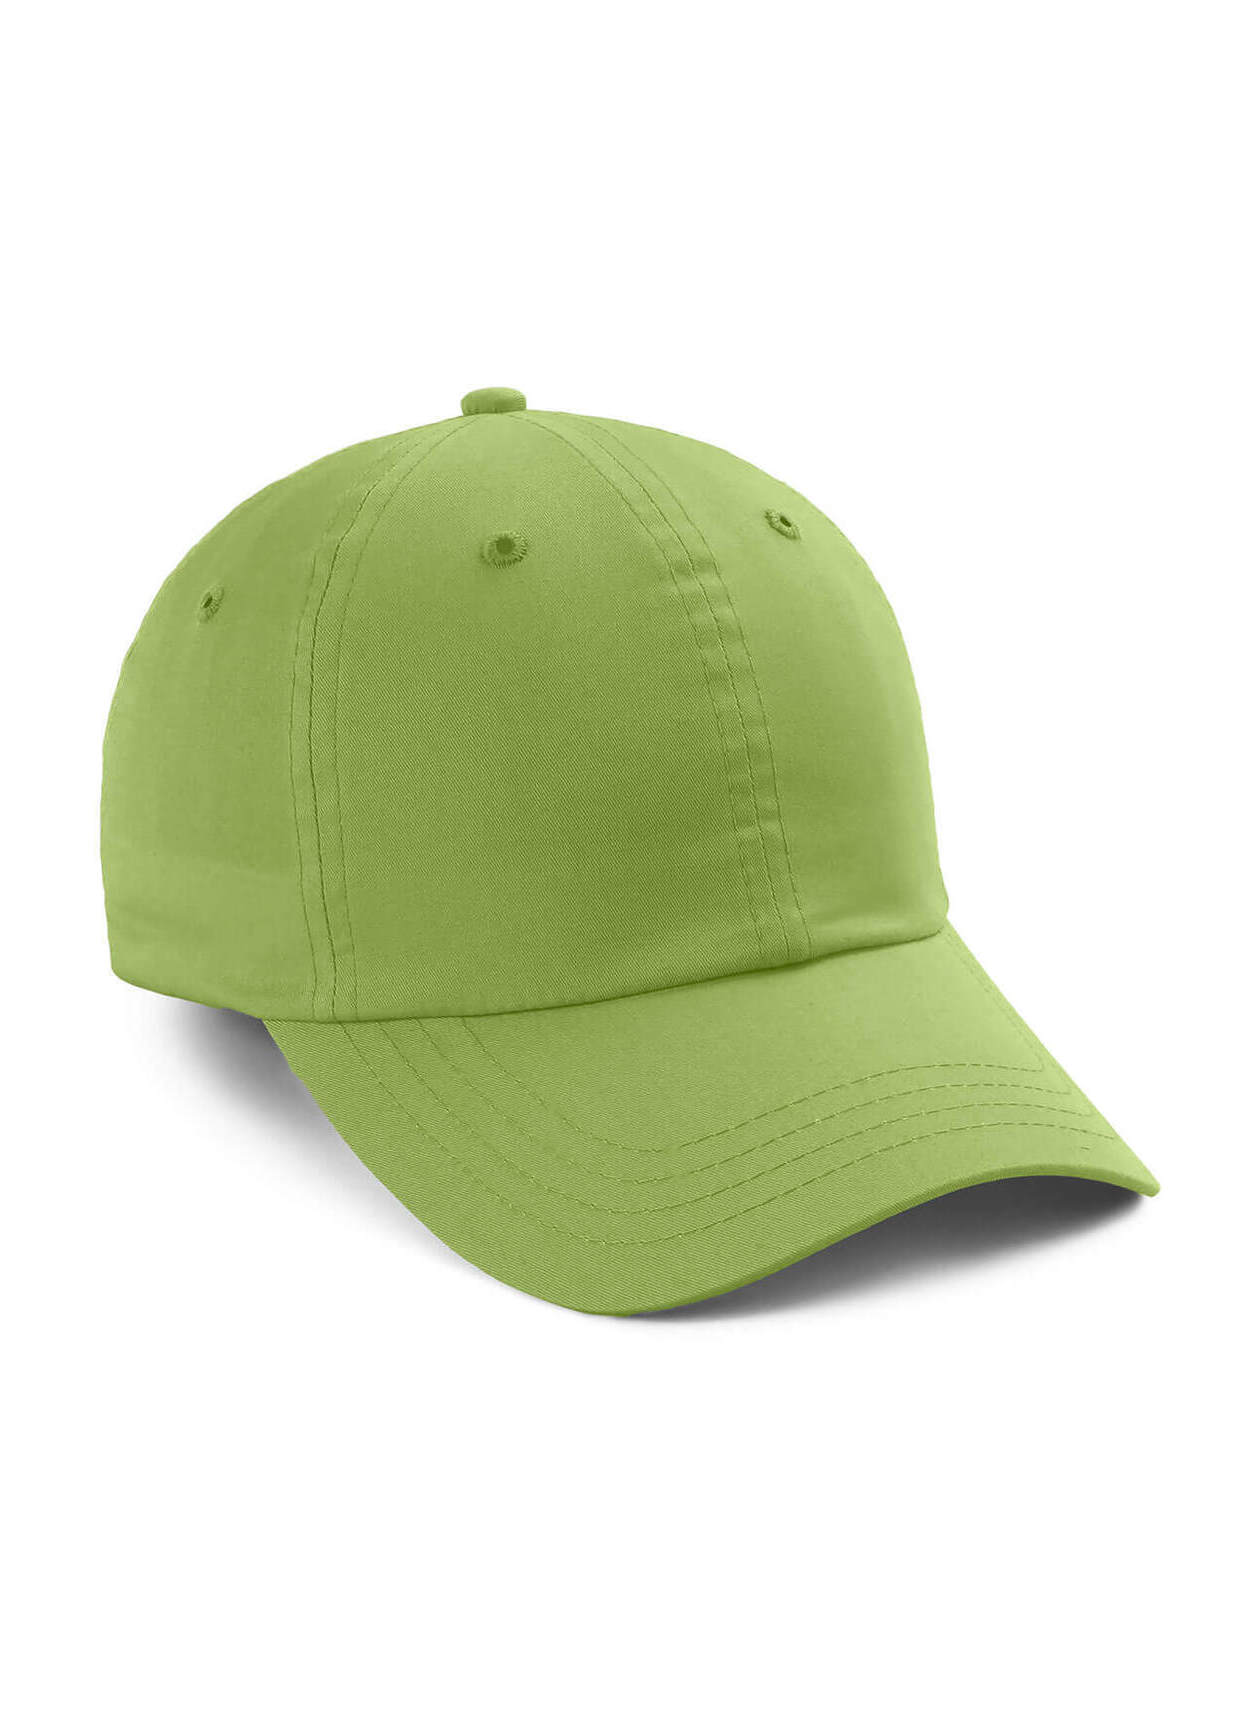 Imperial Lime The Zero Lightweight Cotton Hat